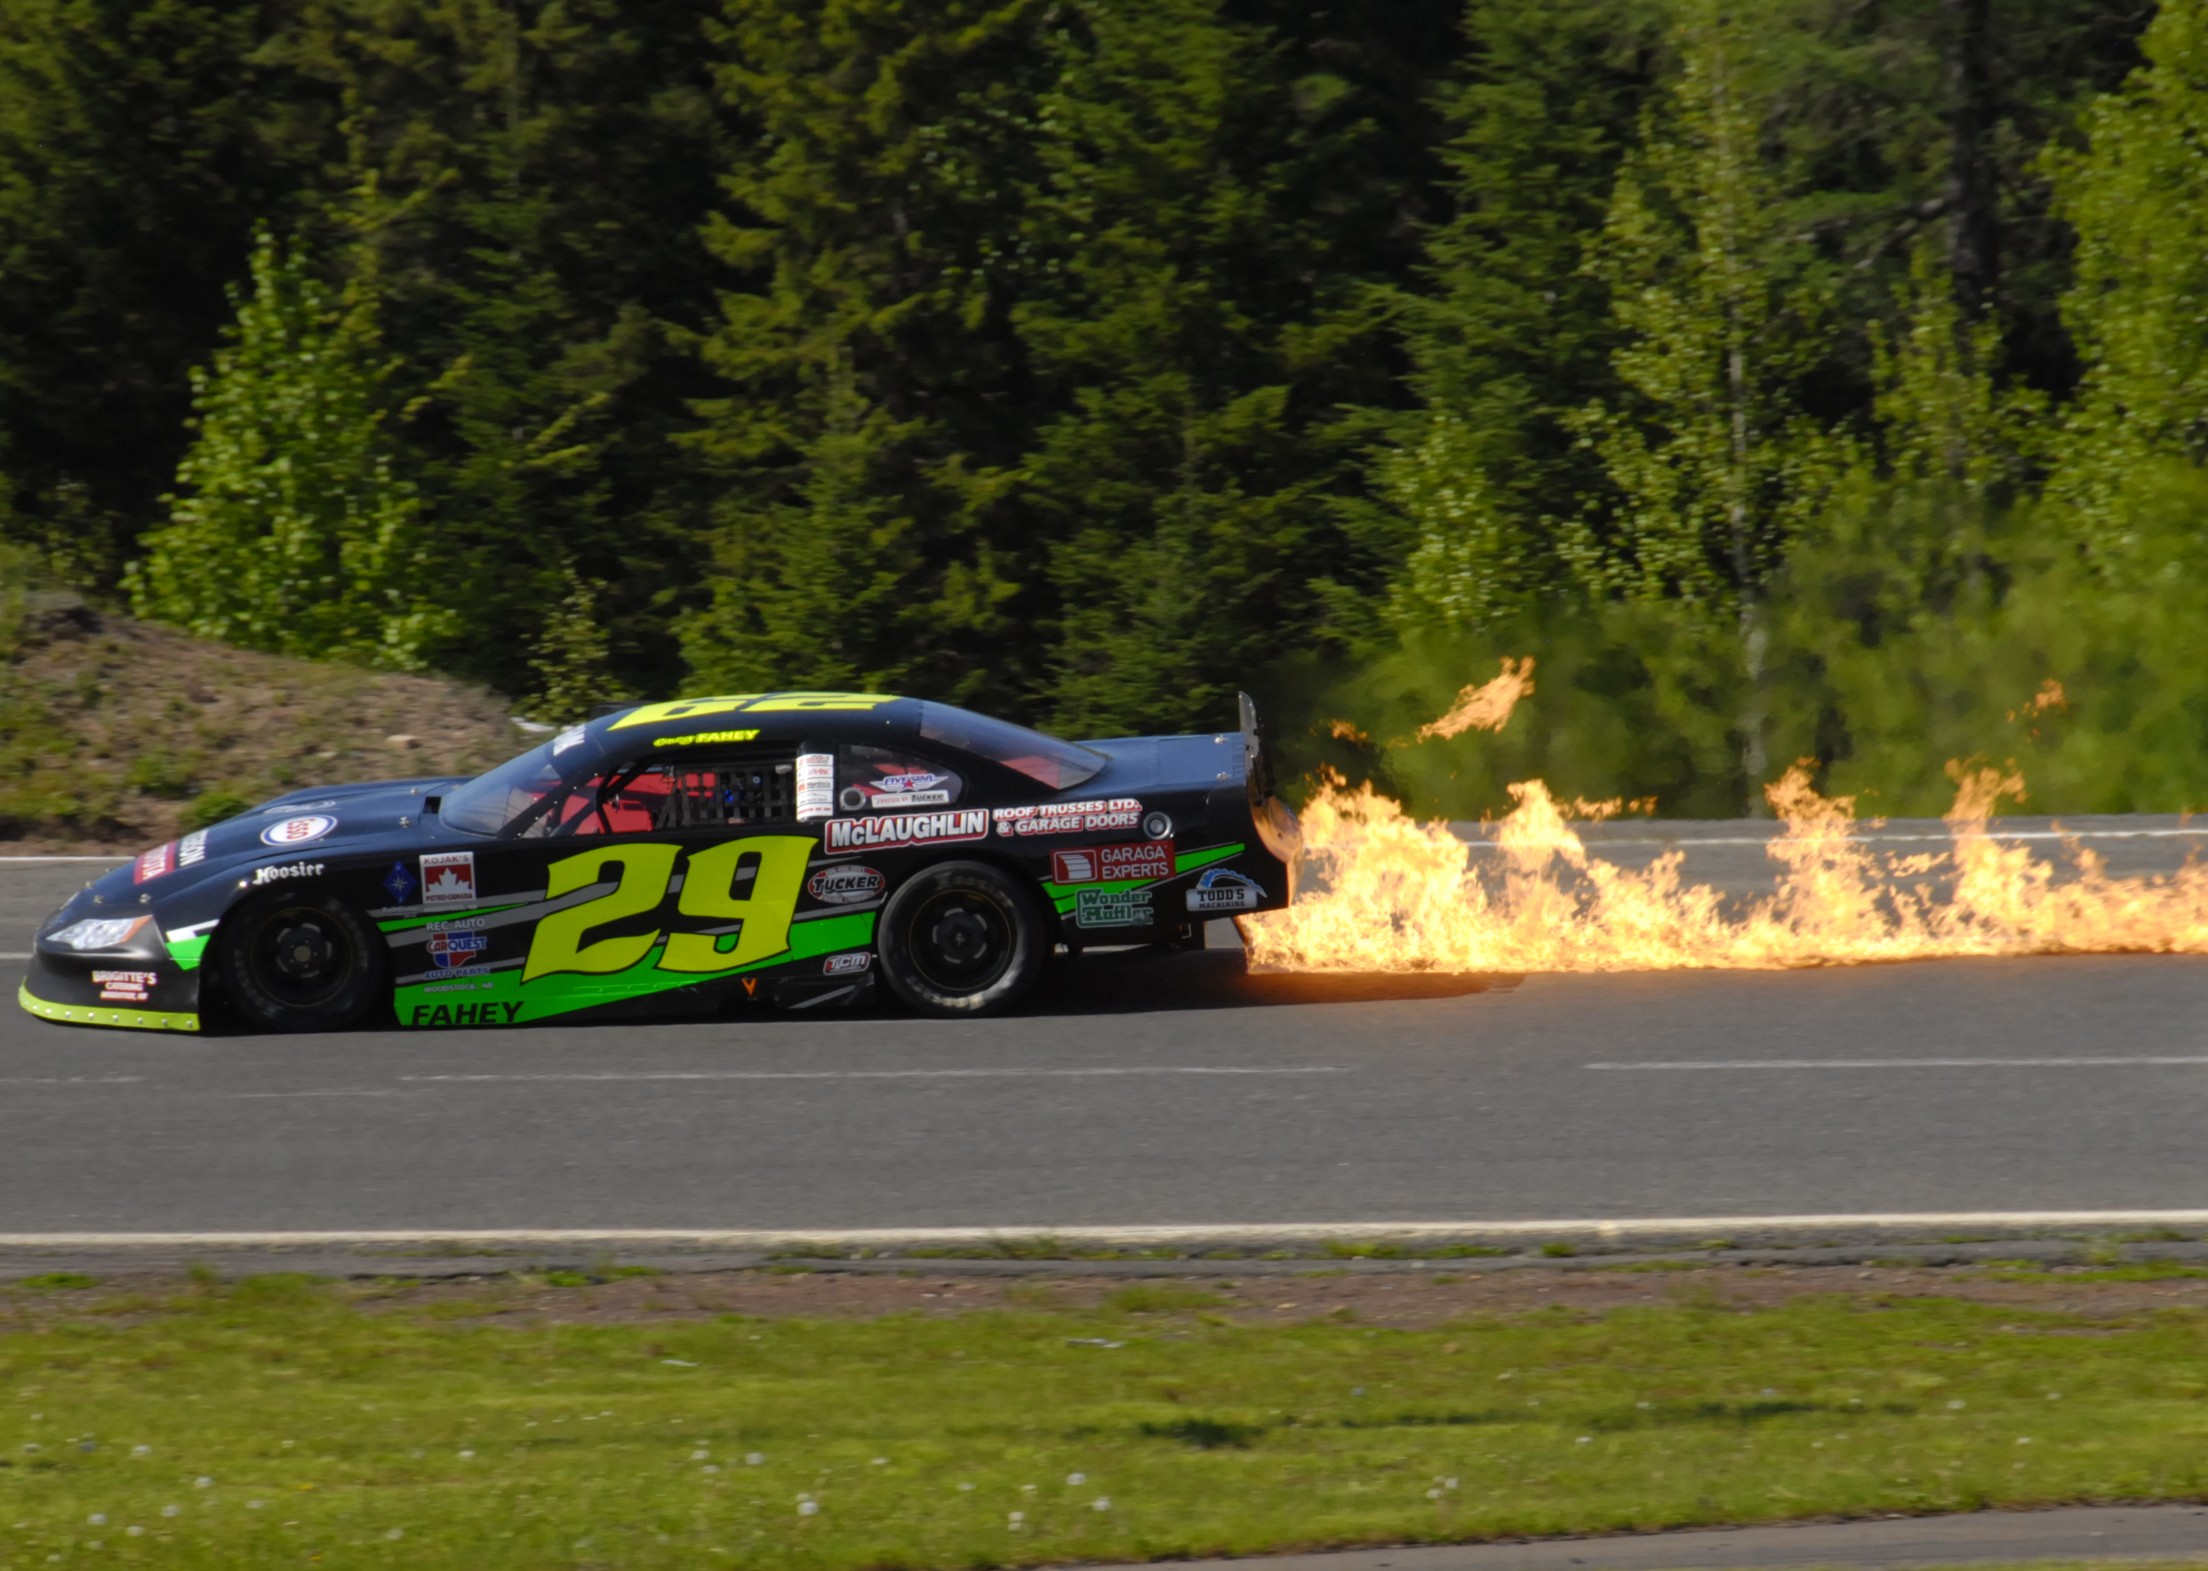 Photo Album: Setting the woods on fire!